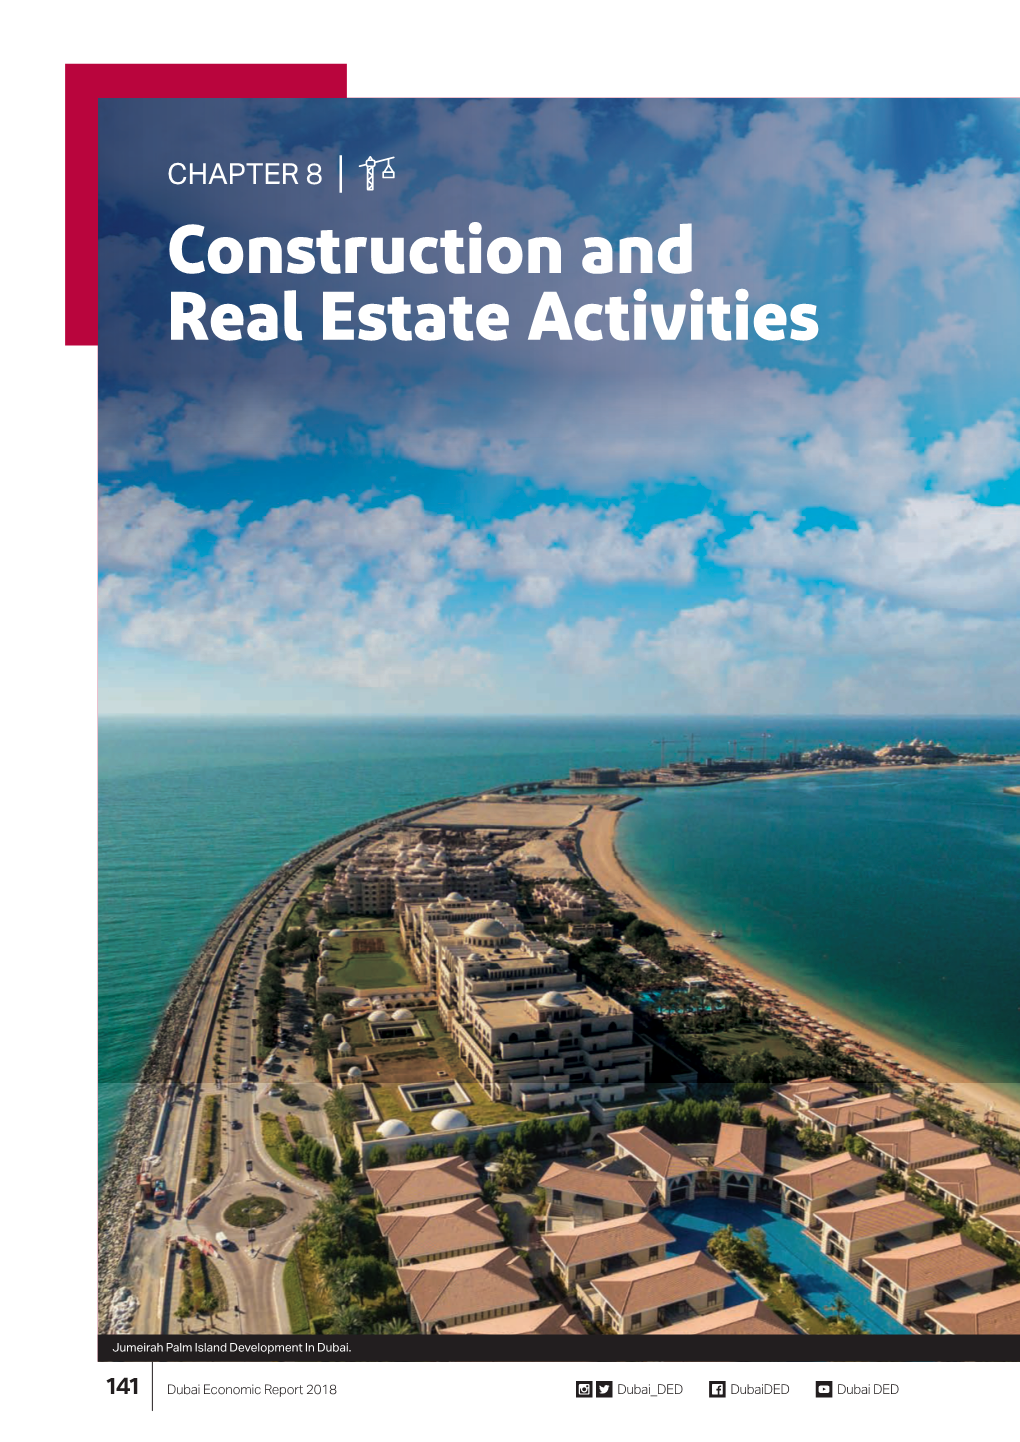 Construction and Real Estate Activities